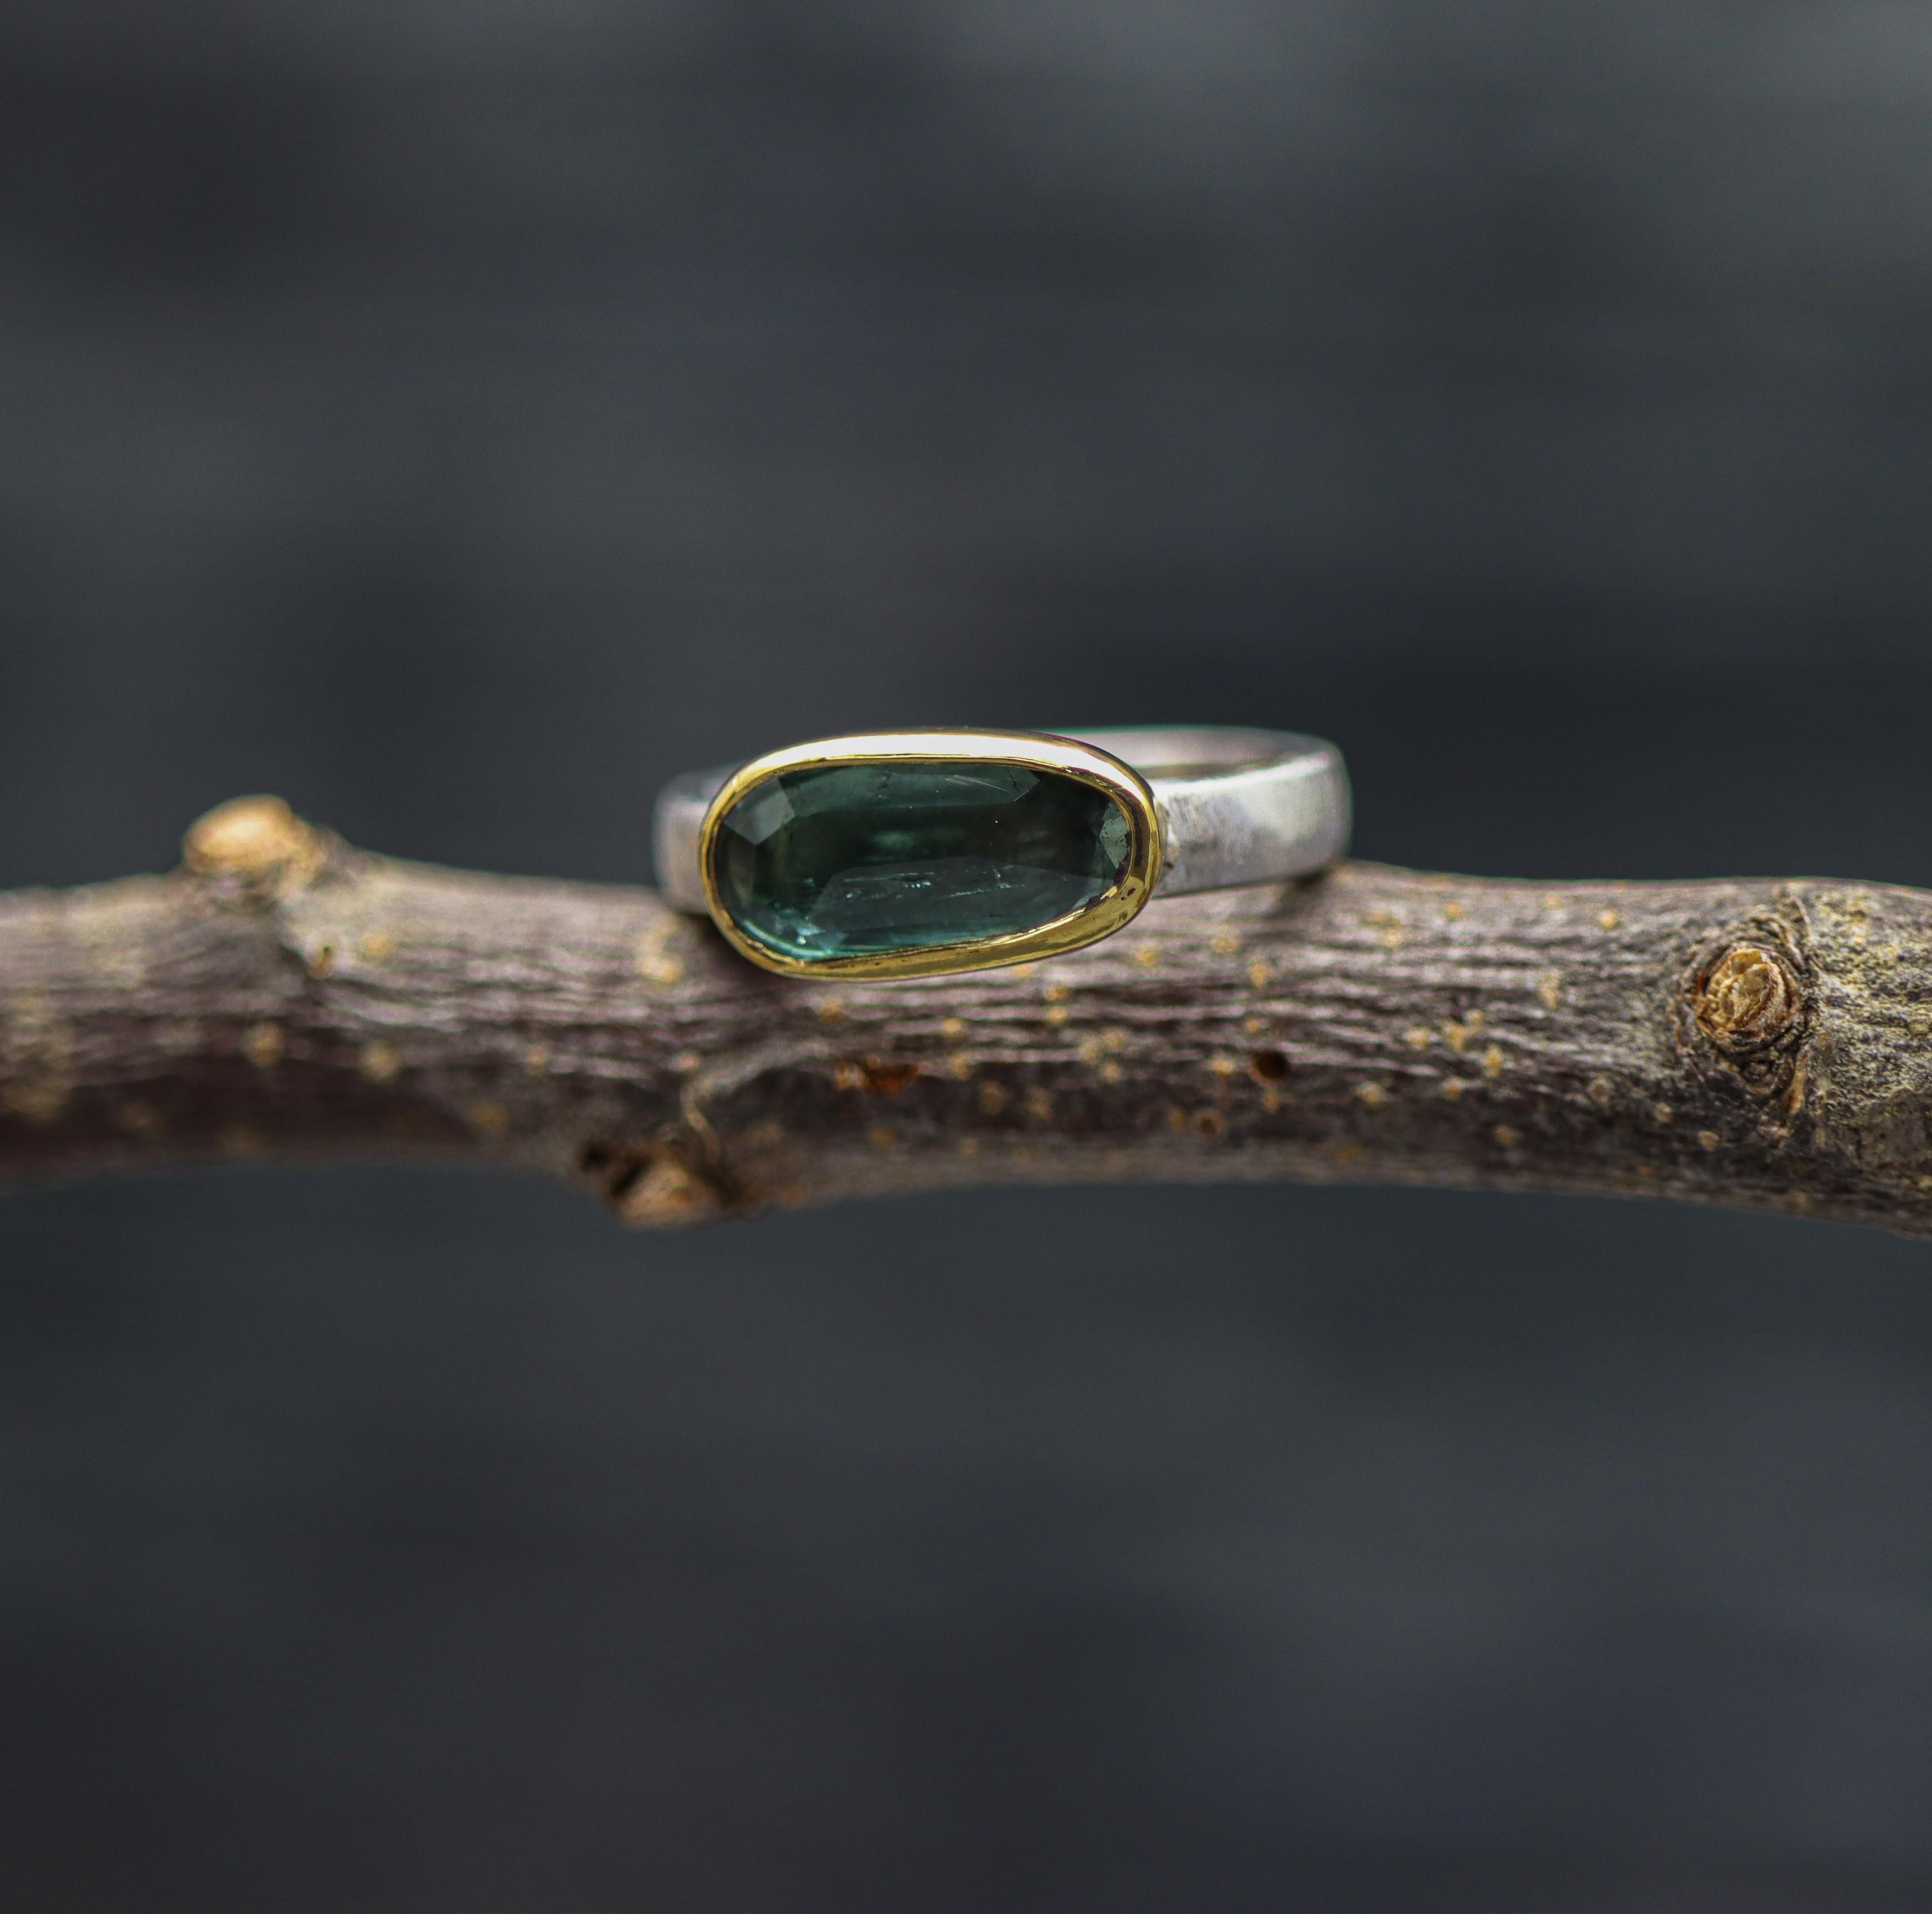 Green Tourmaline Sterling Silver and 22k Gold Ring Size 7.25